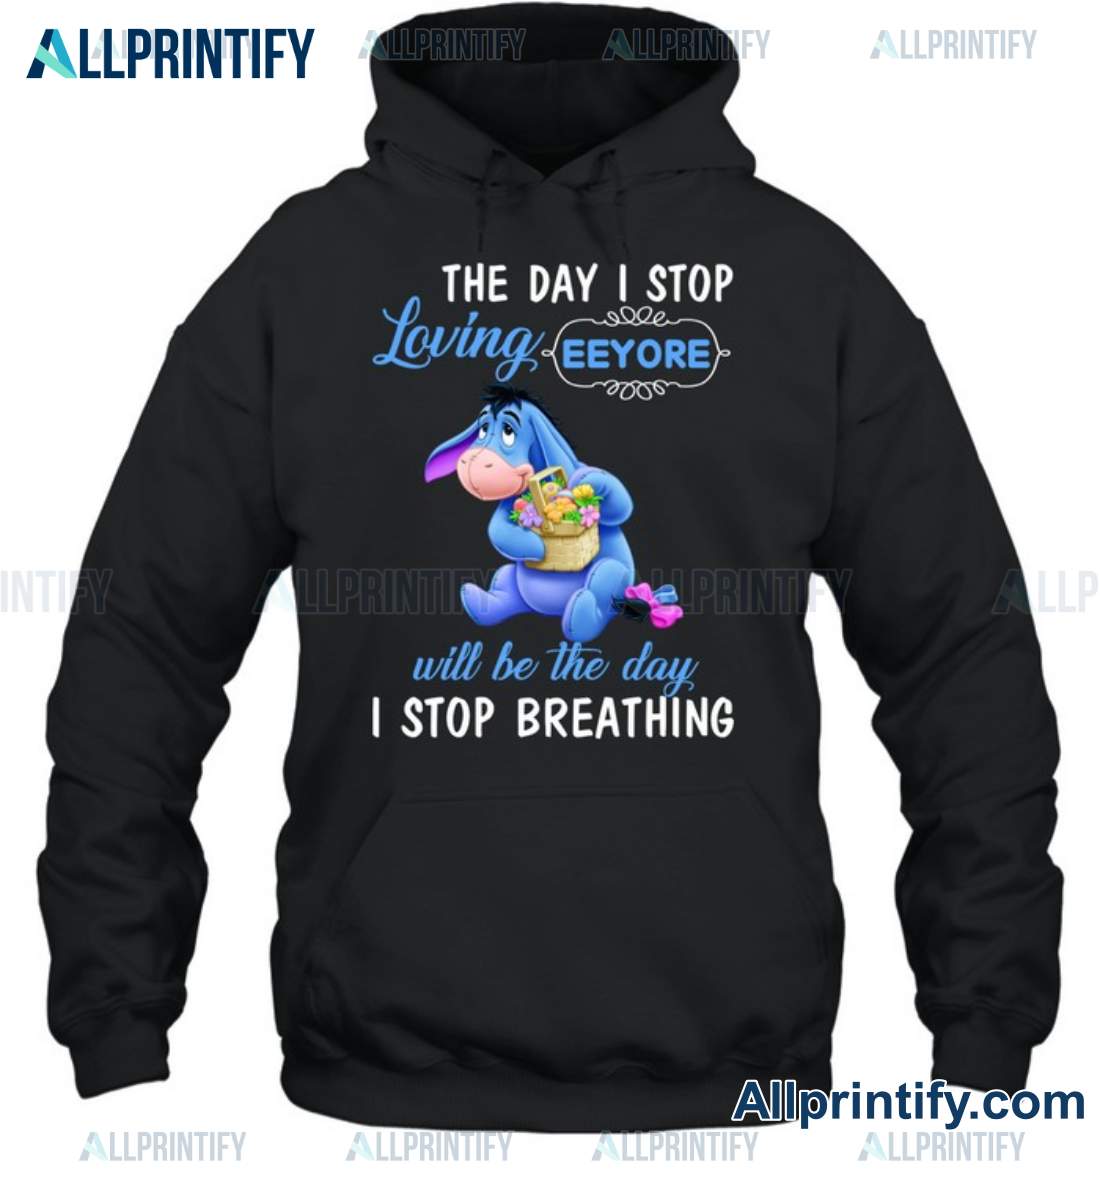 The Day I Stop Loving Eeyᴏre Will Be The Day I Stop Breathing Shirt, Hoodie